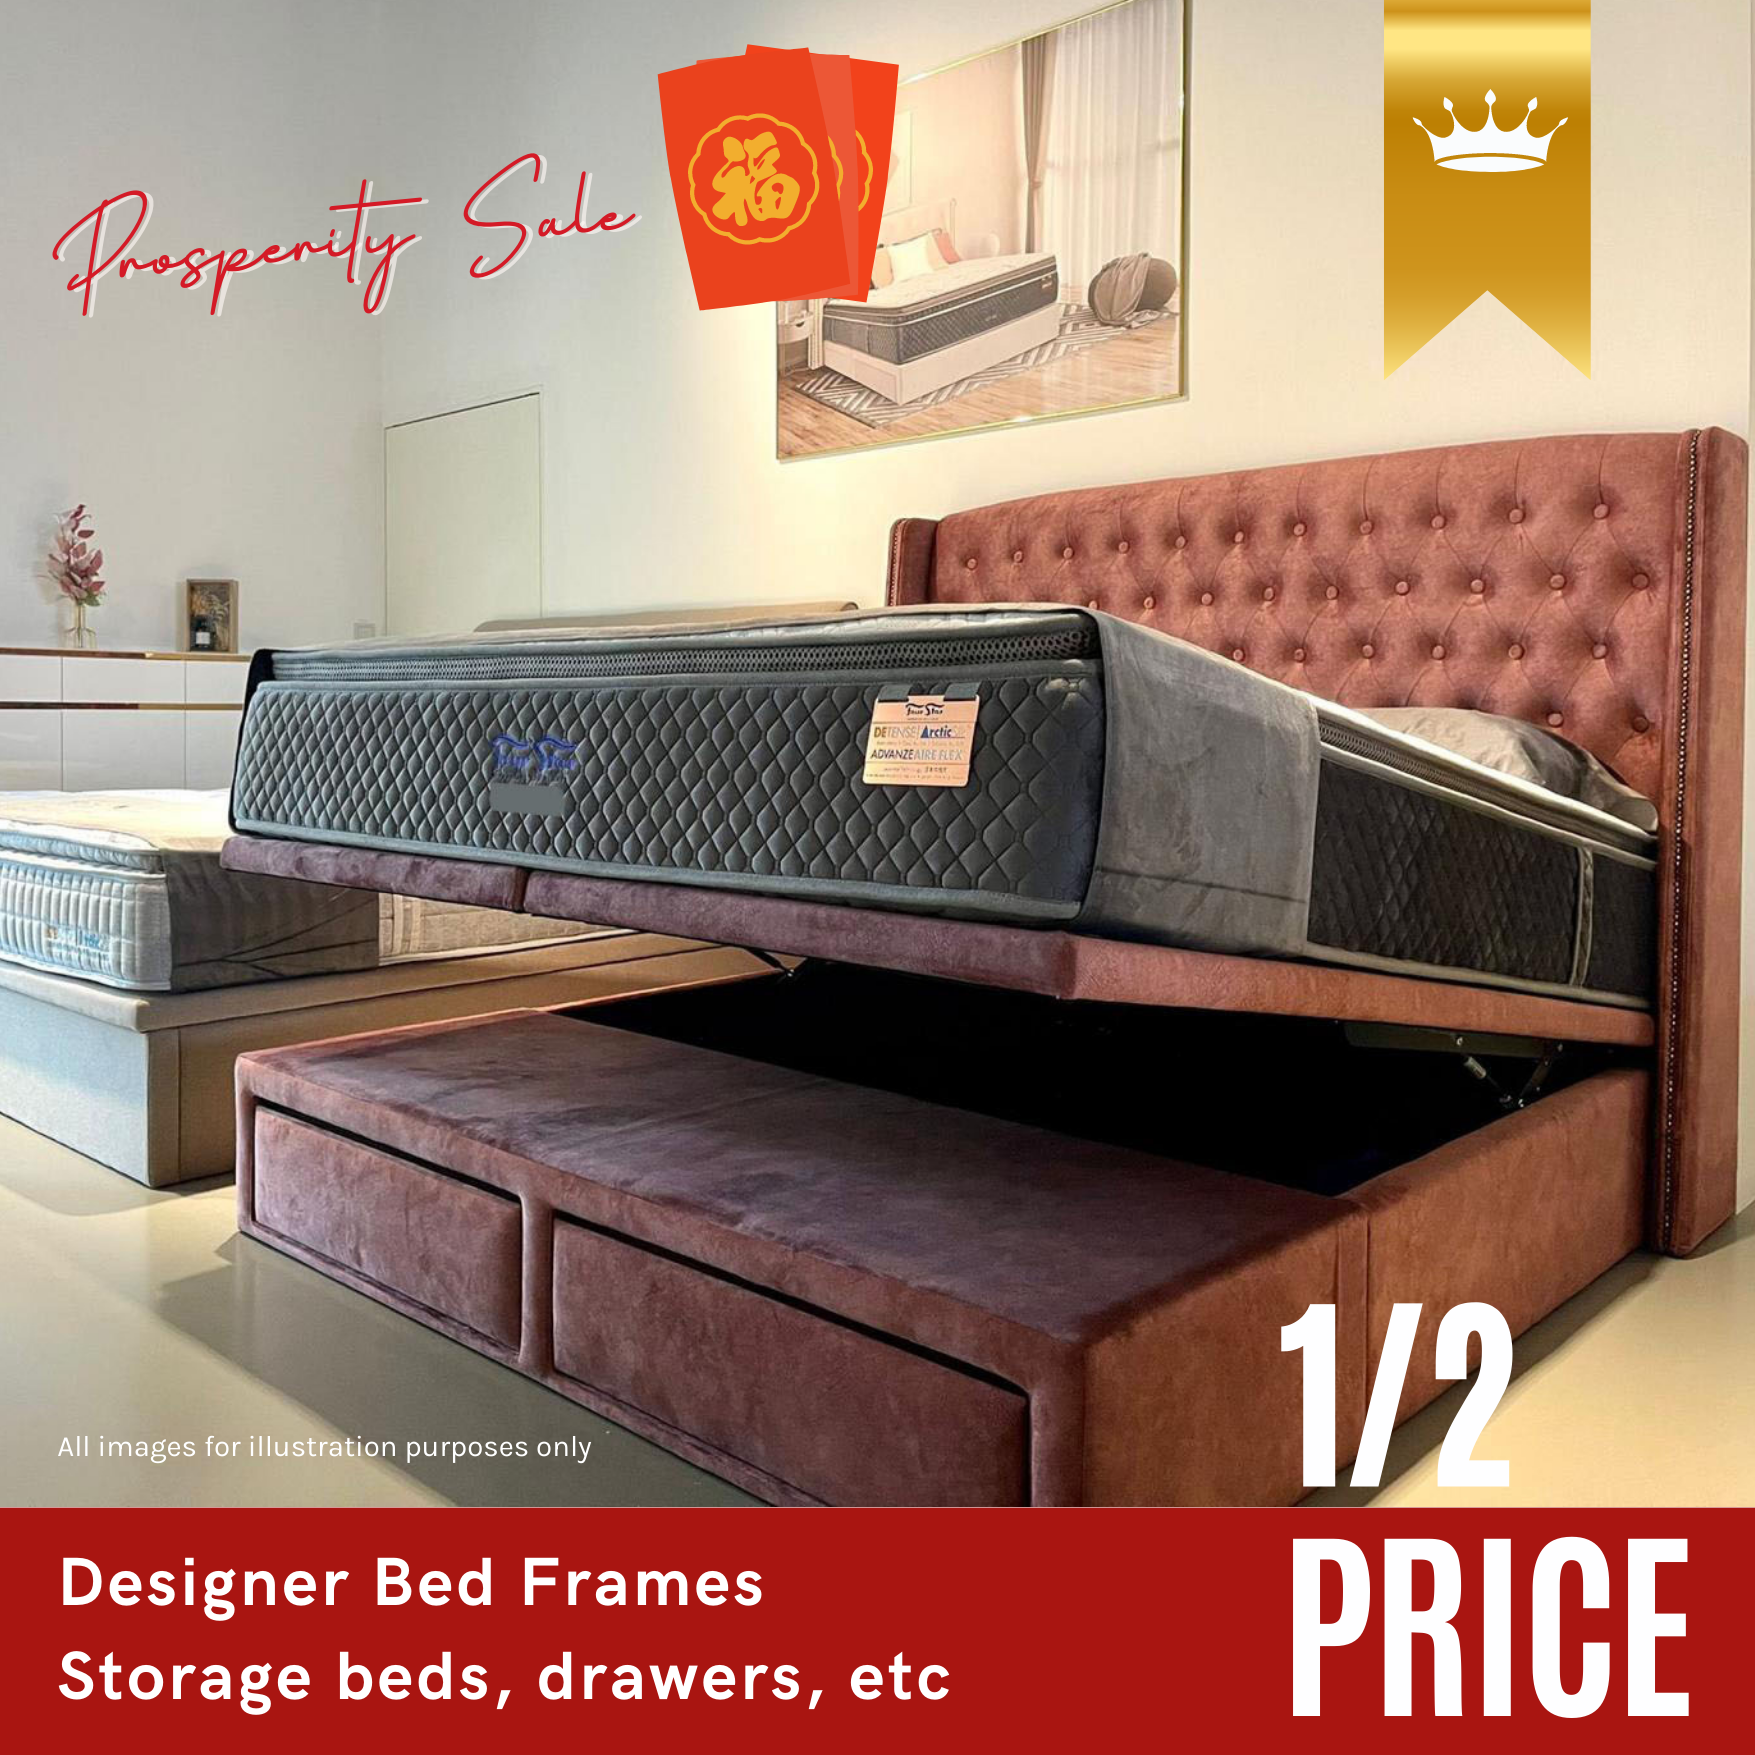 Lobang: Four Star's CNY Prosperity Sale Has Over 5,000 Items At 50% Off Including Mattresses, Bed Frames, Sofas & More - 9